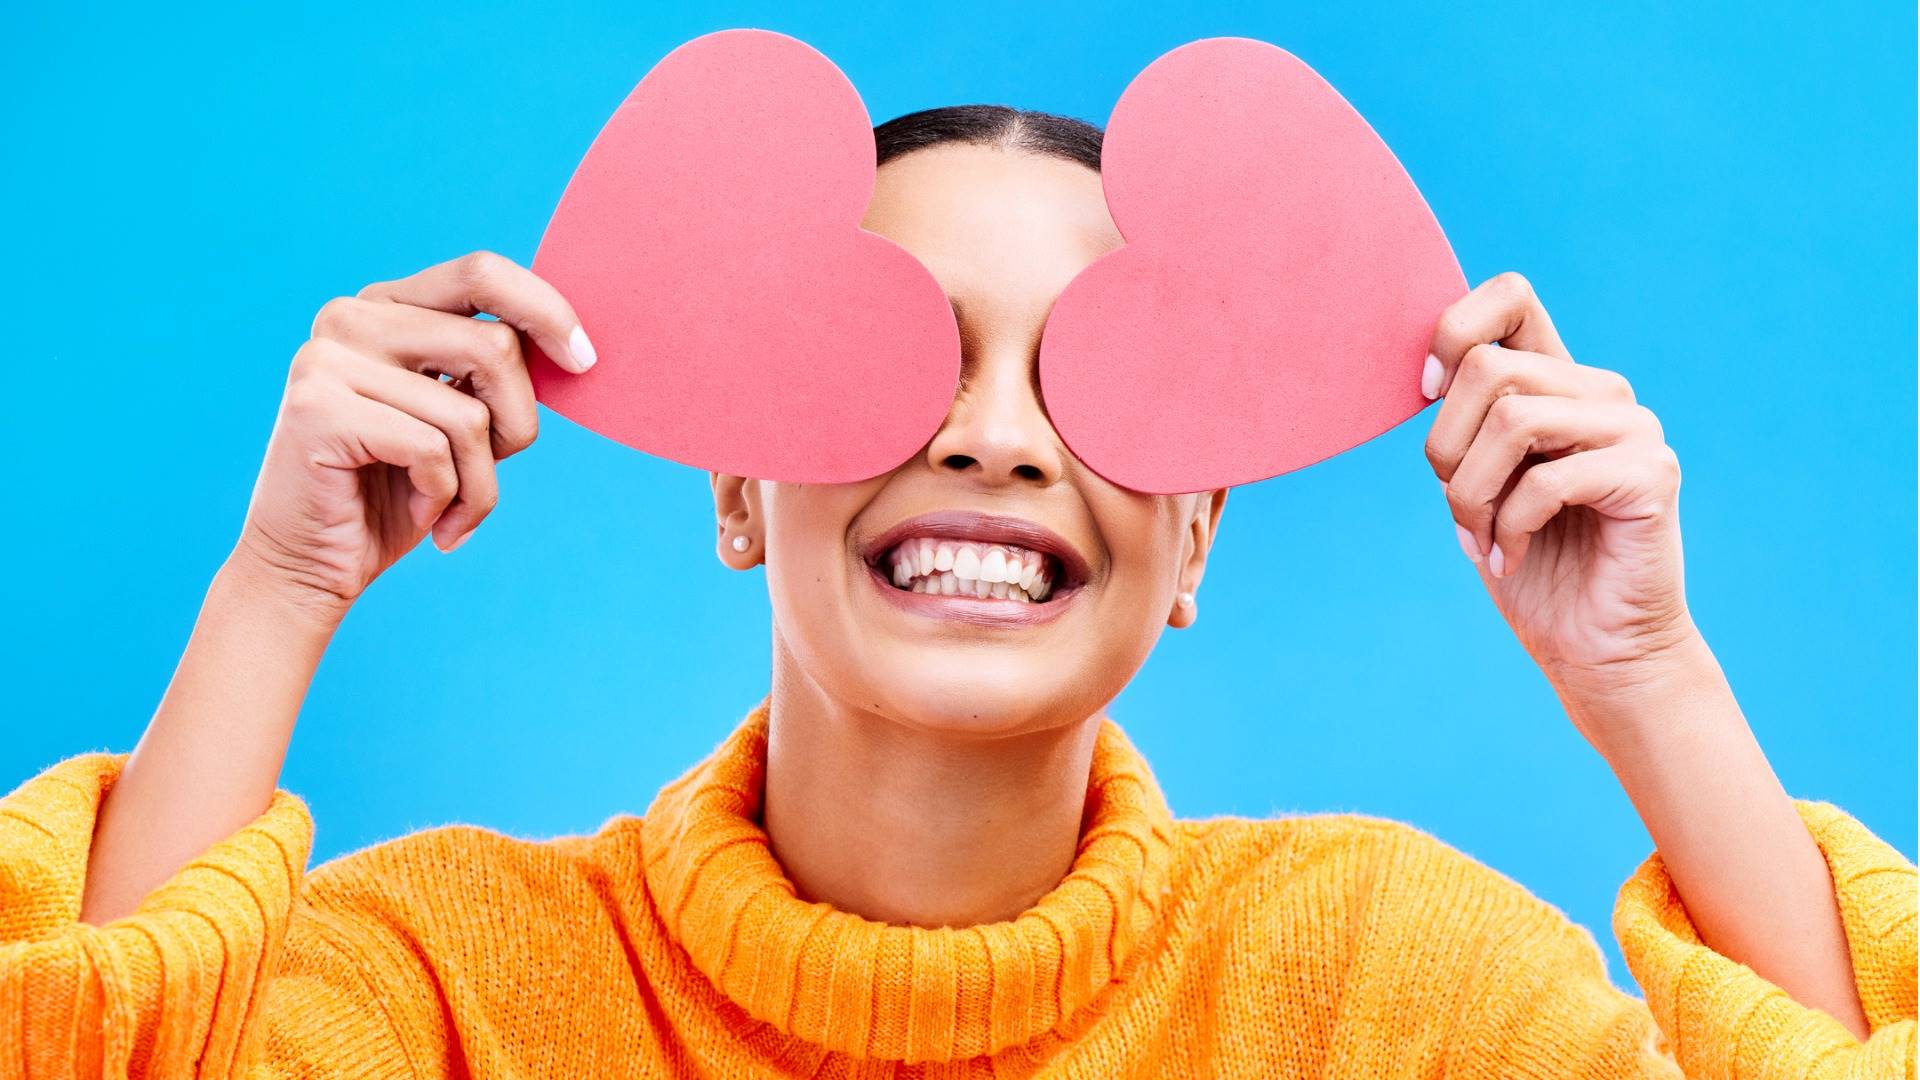 Woman smiling carrying heart-shaped cards